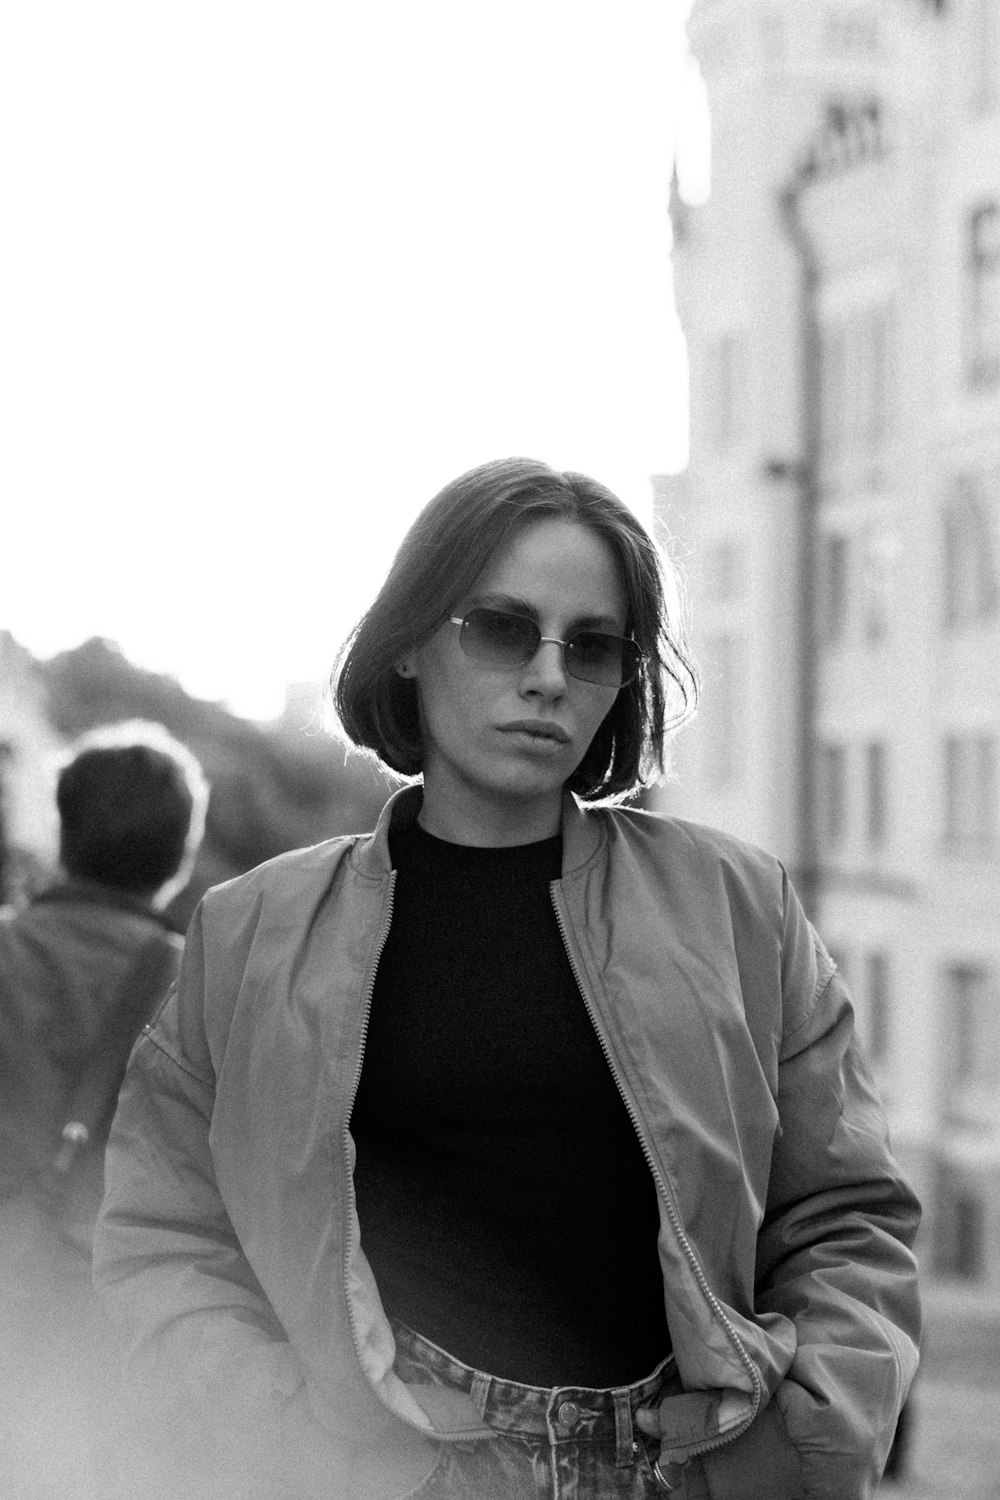 a woman in a jacket and sunglasses walking down a street